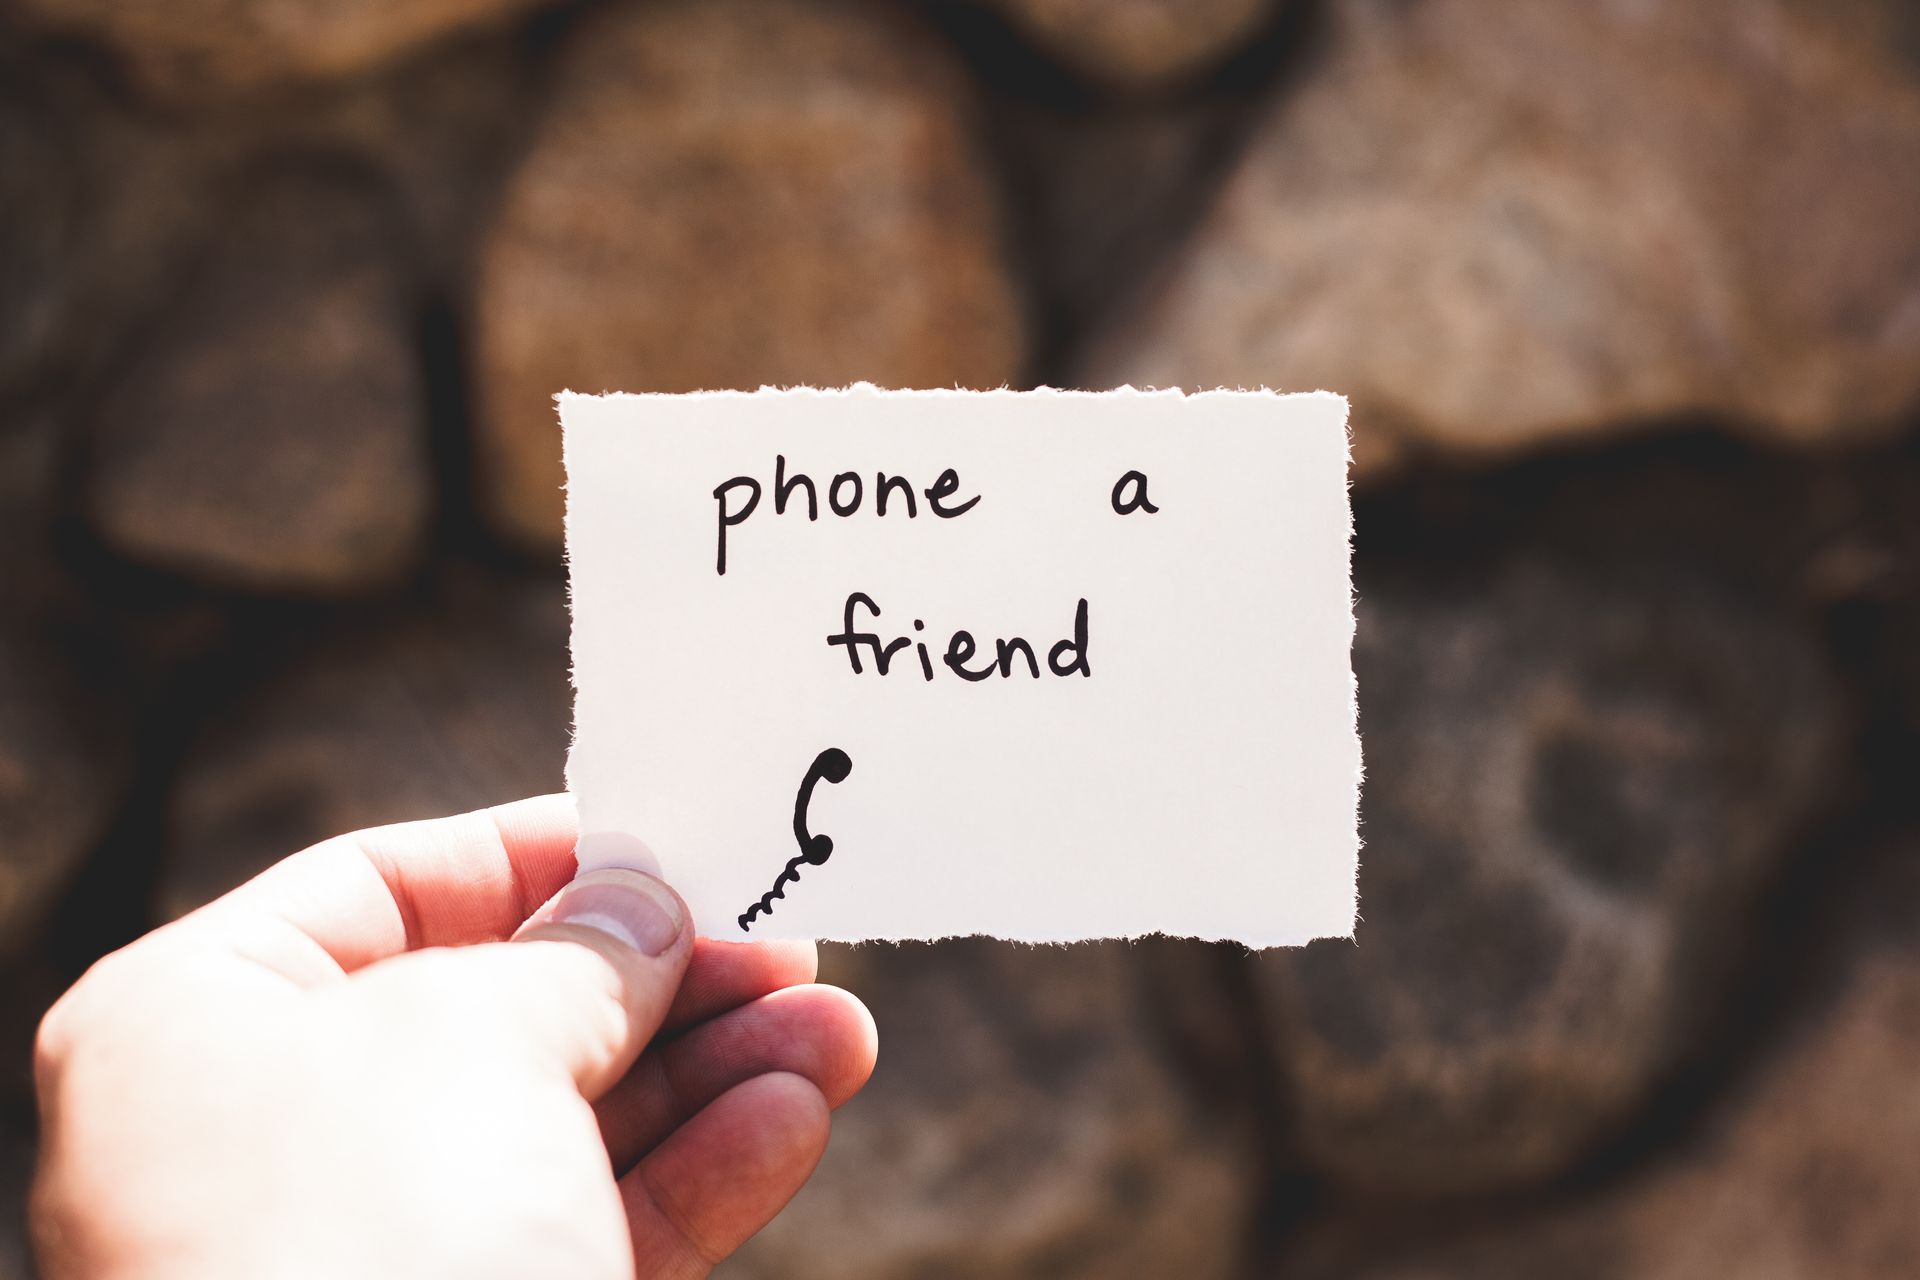 phone a friend for support